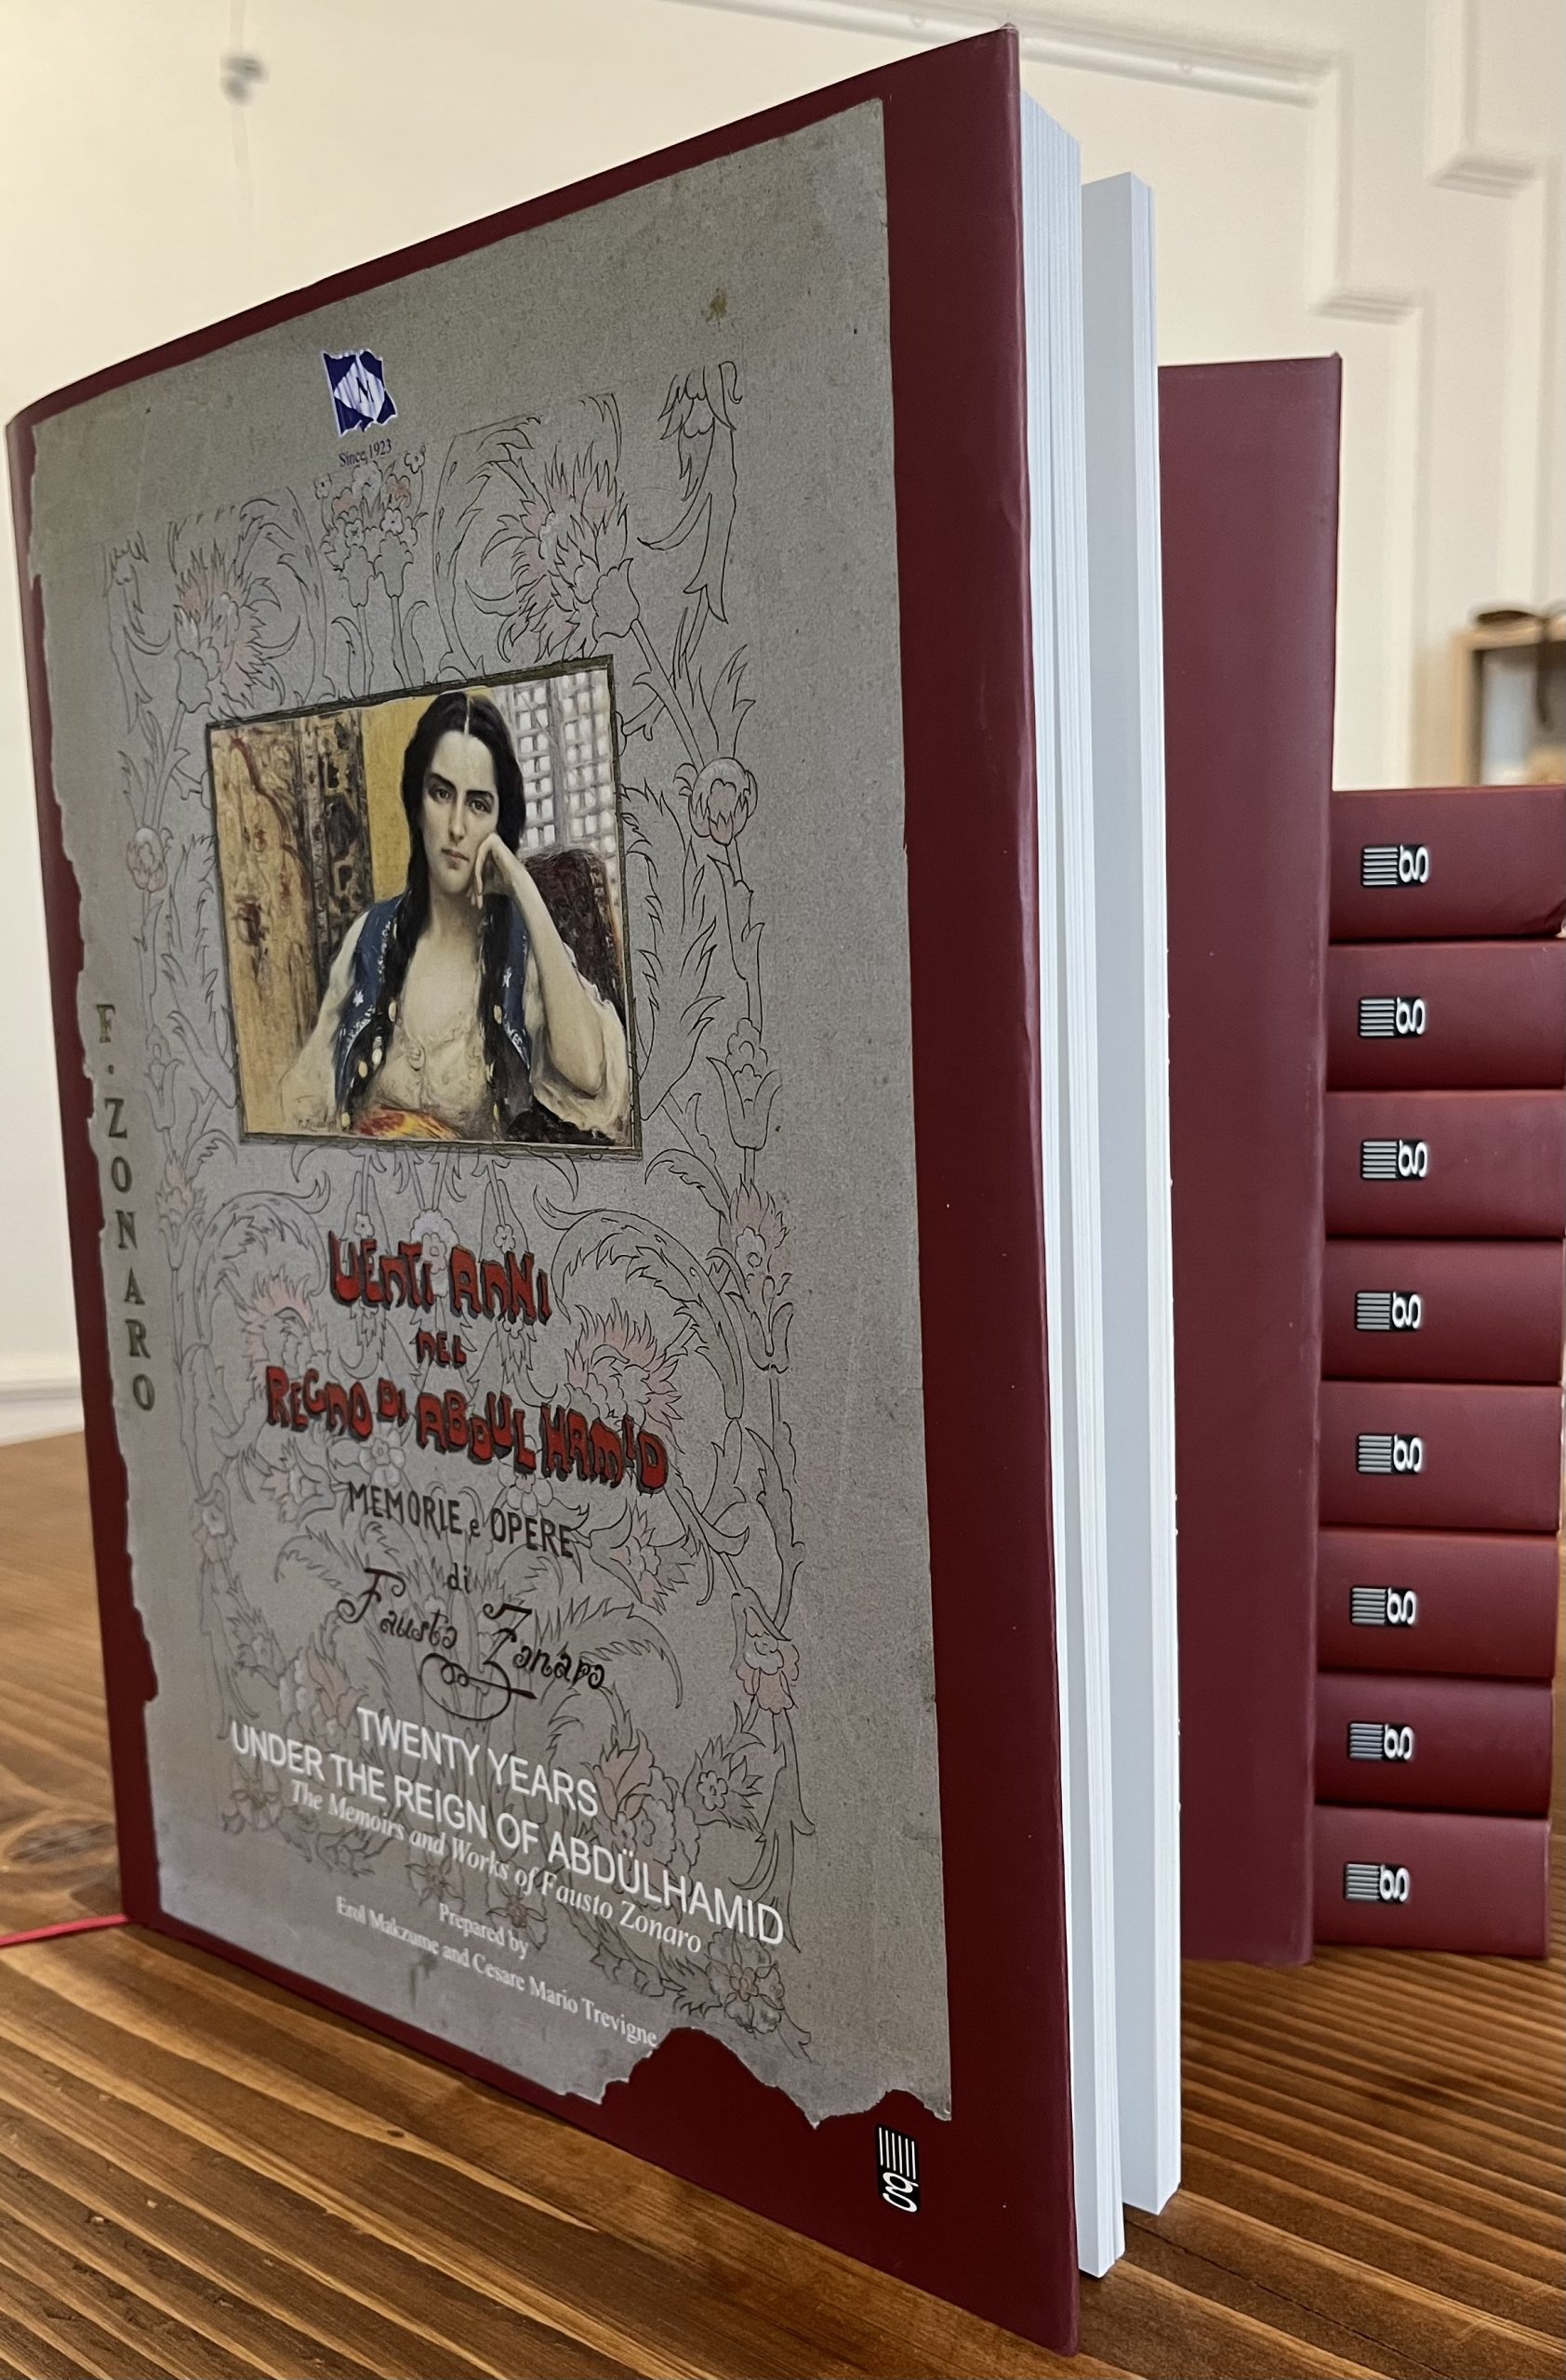 Twenty Years Under The Reign of Abdülhamid, The Memoirs and Works of Fausto Zonaro